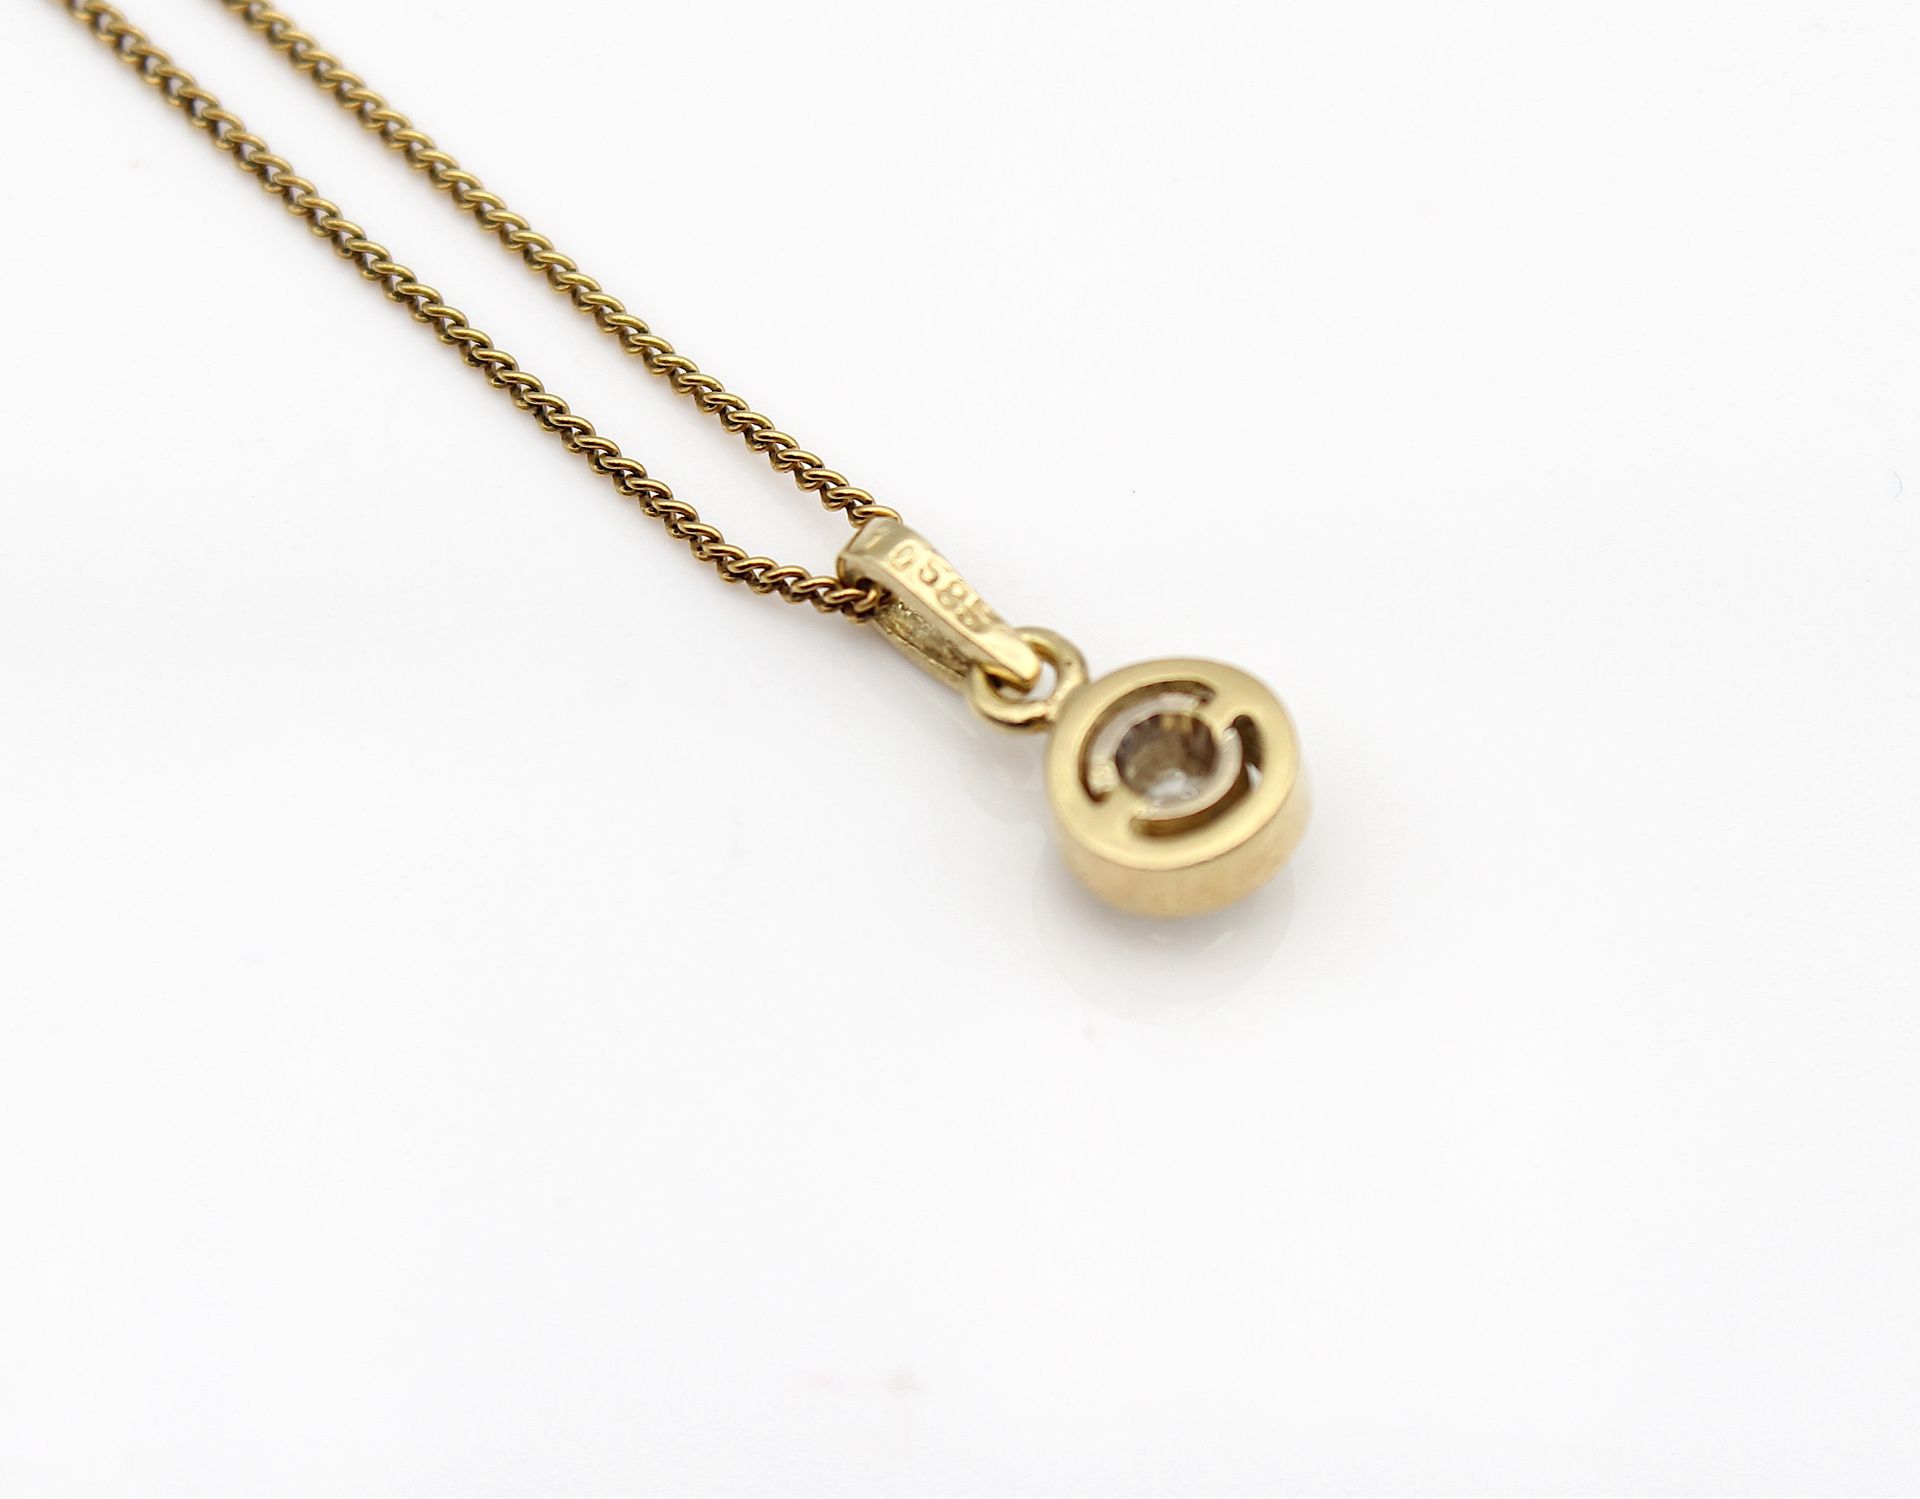 Chain with brilliant pendant - Image 3 of 4